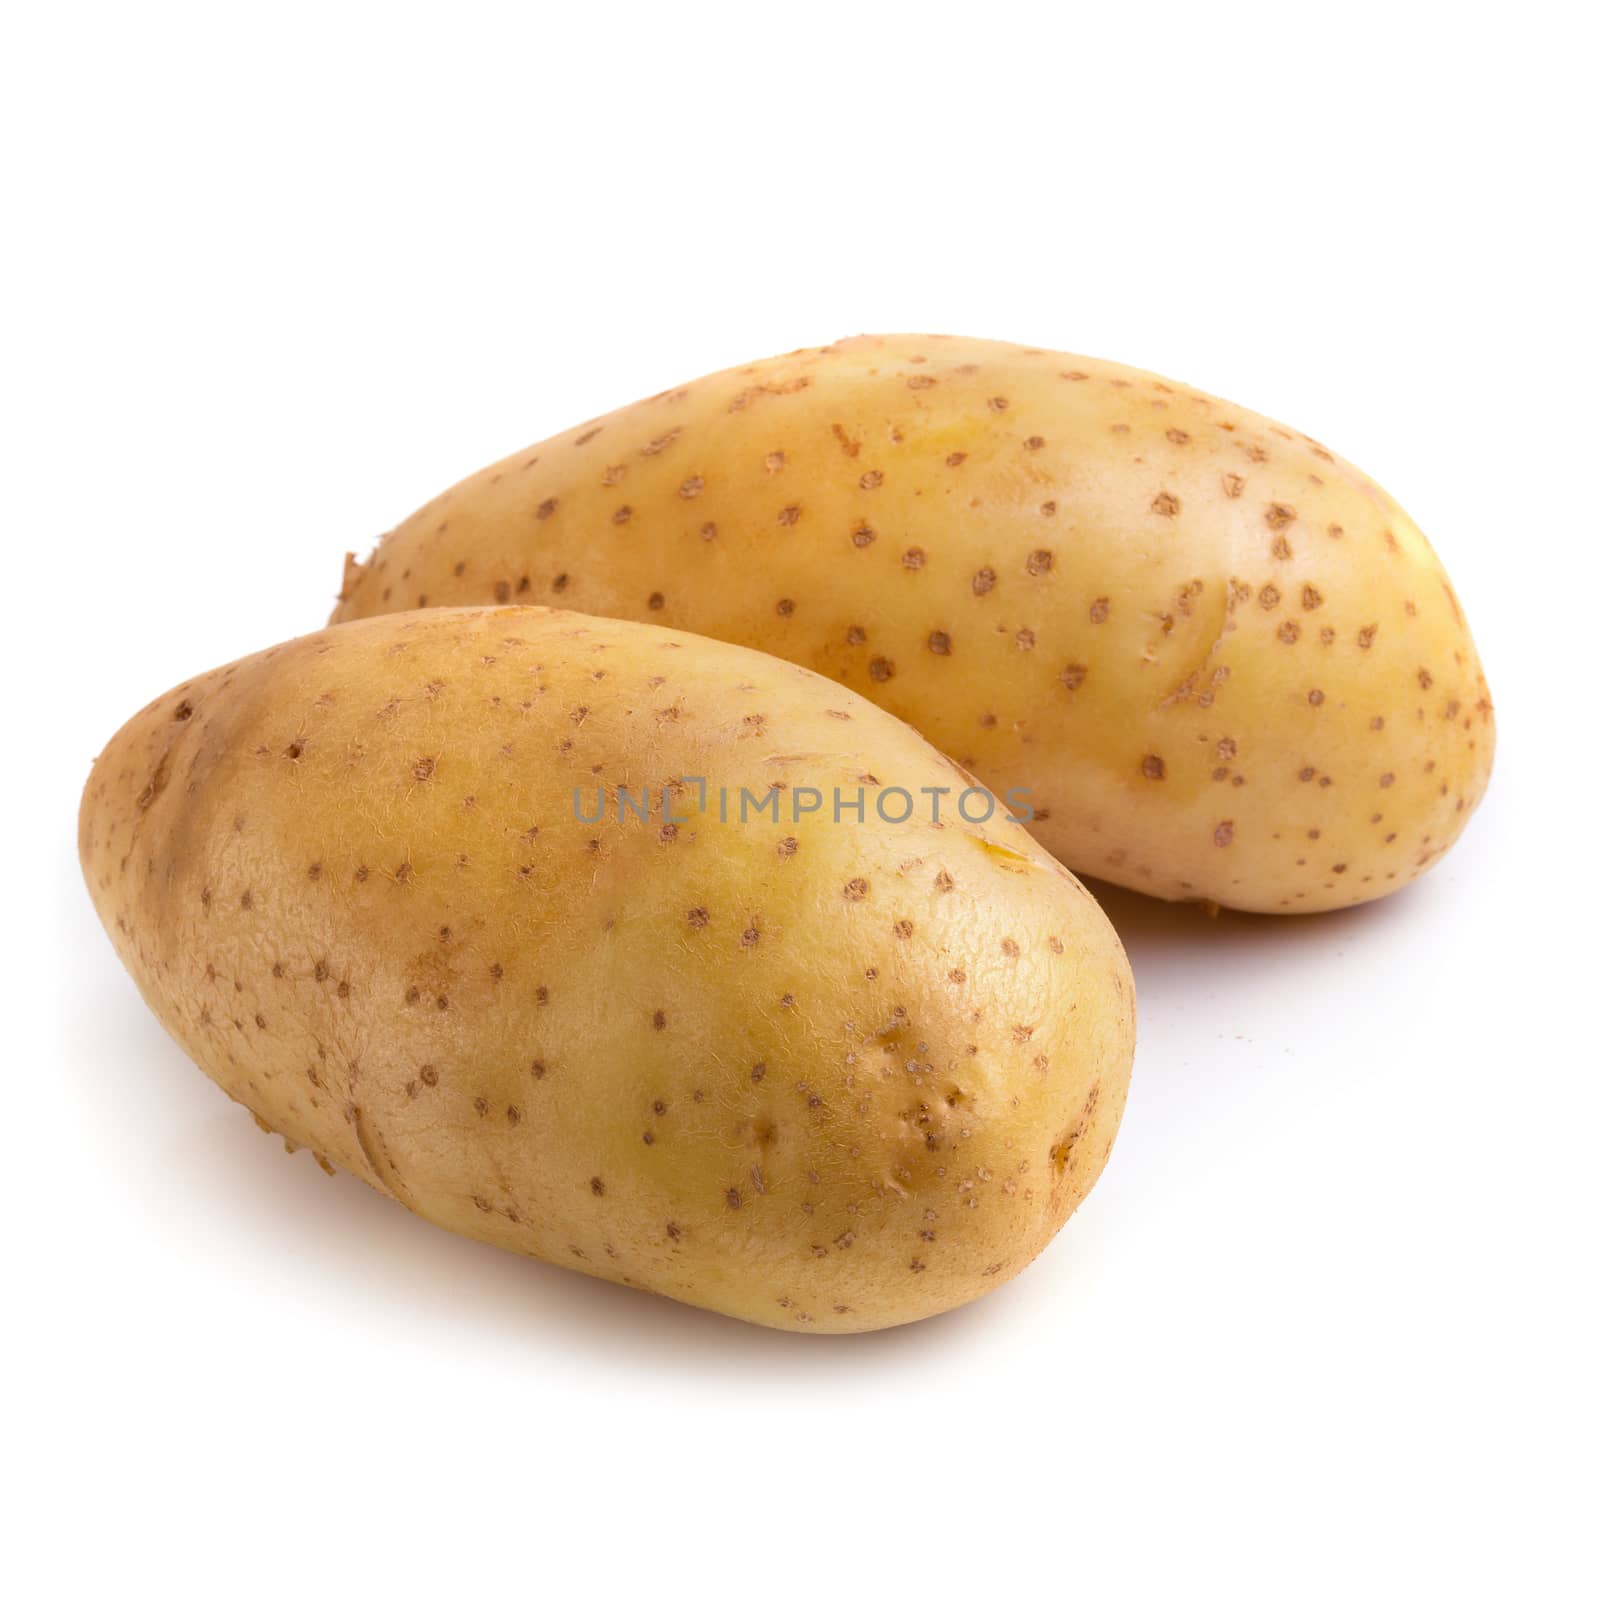 Fresh potatoes isolated on a white background.